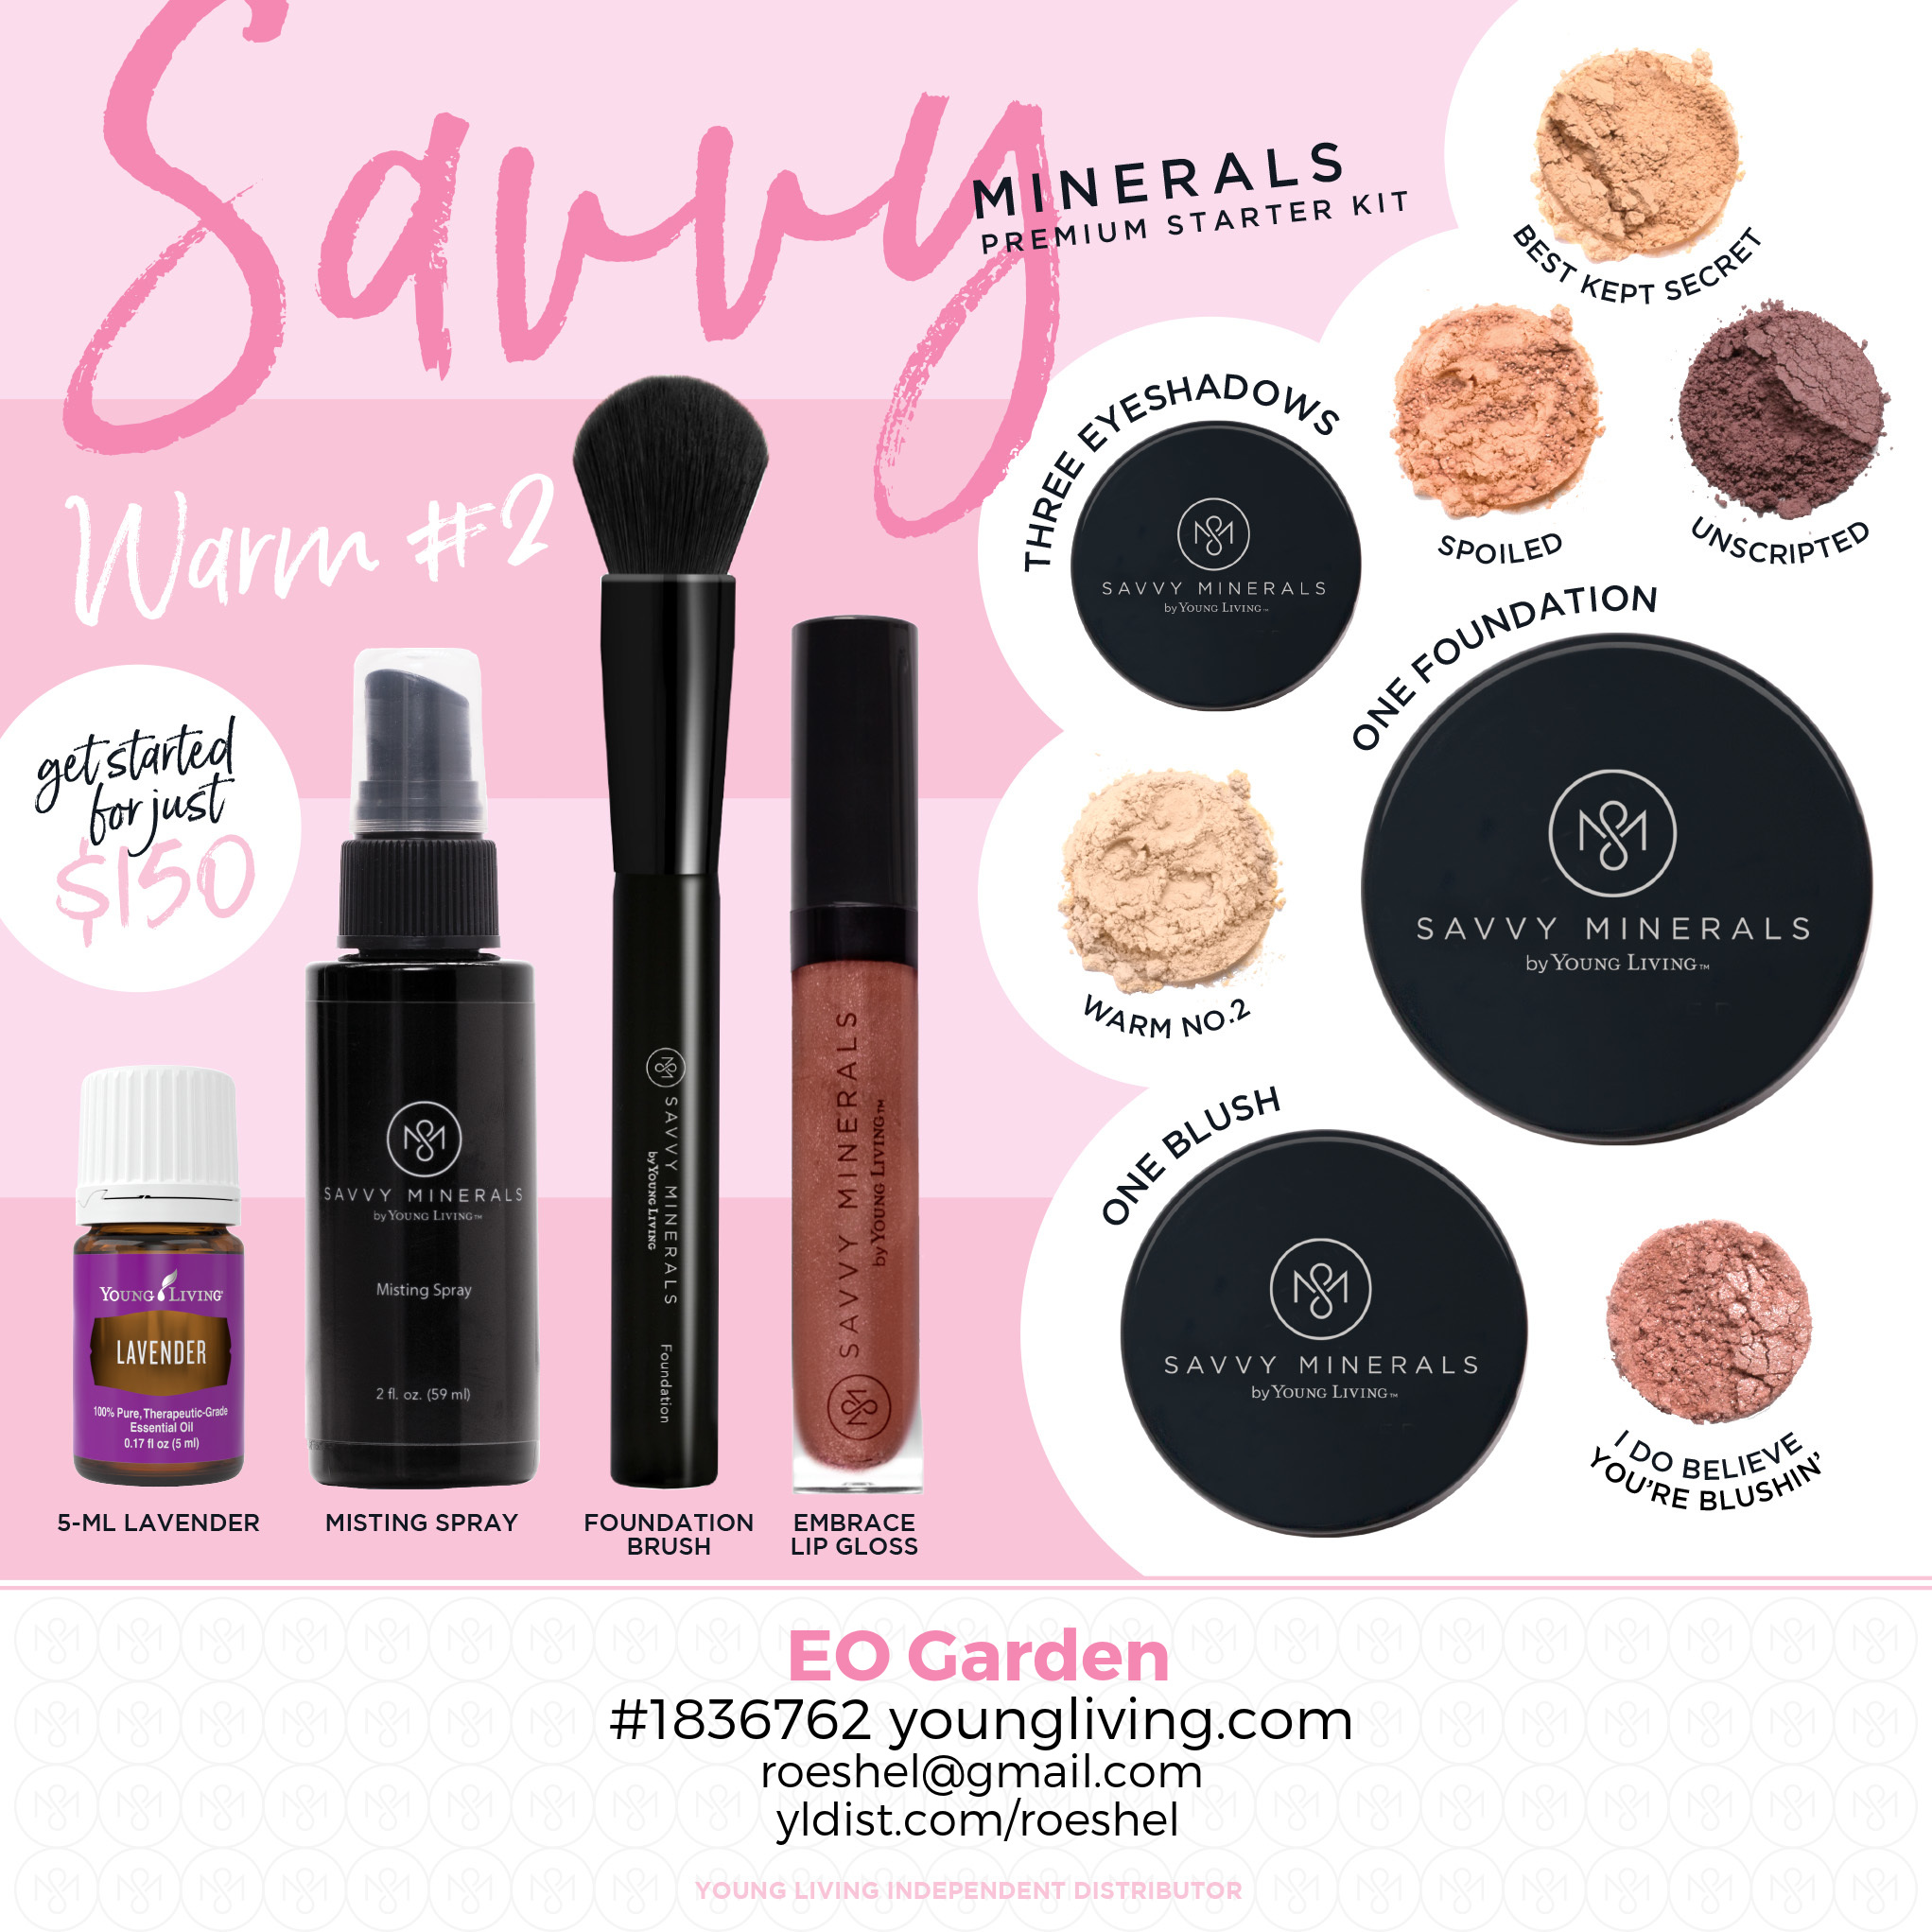 Warm 2 Savvy Minerals chemical free makeup